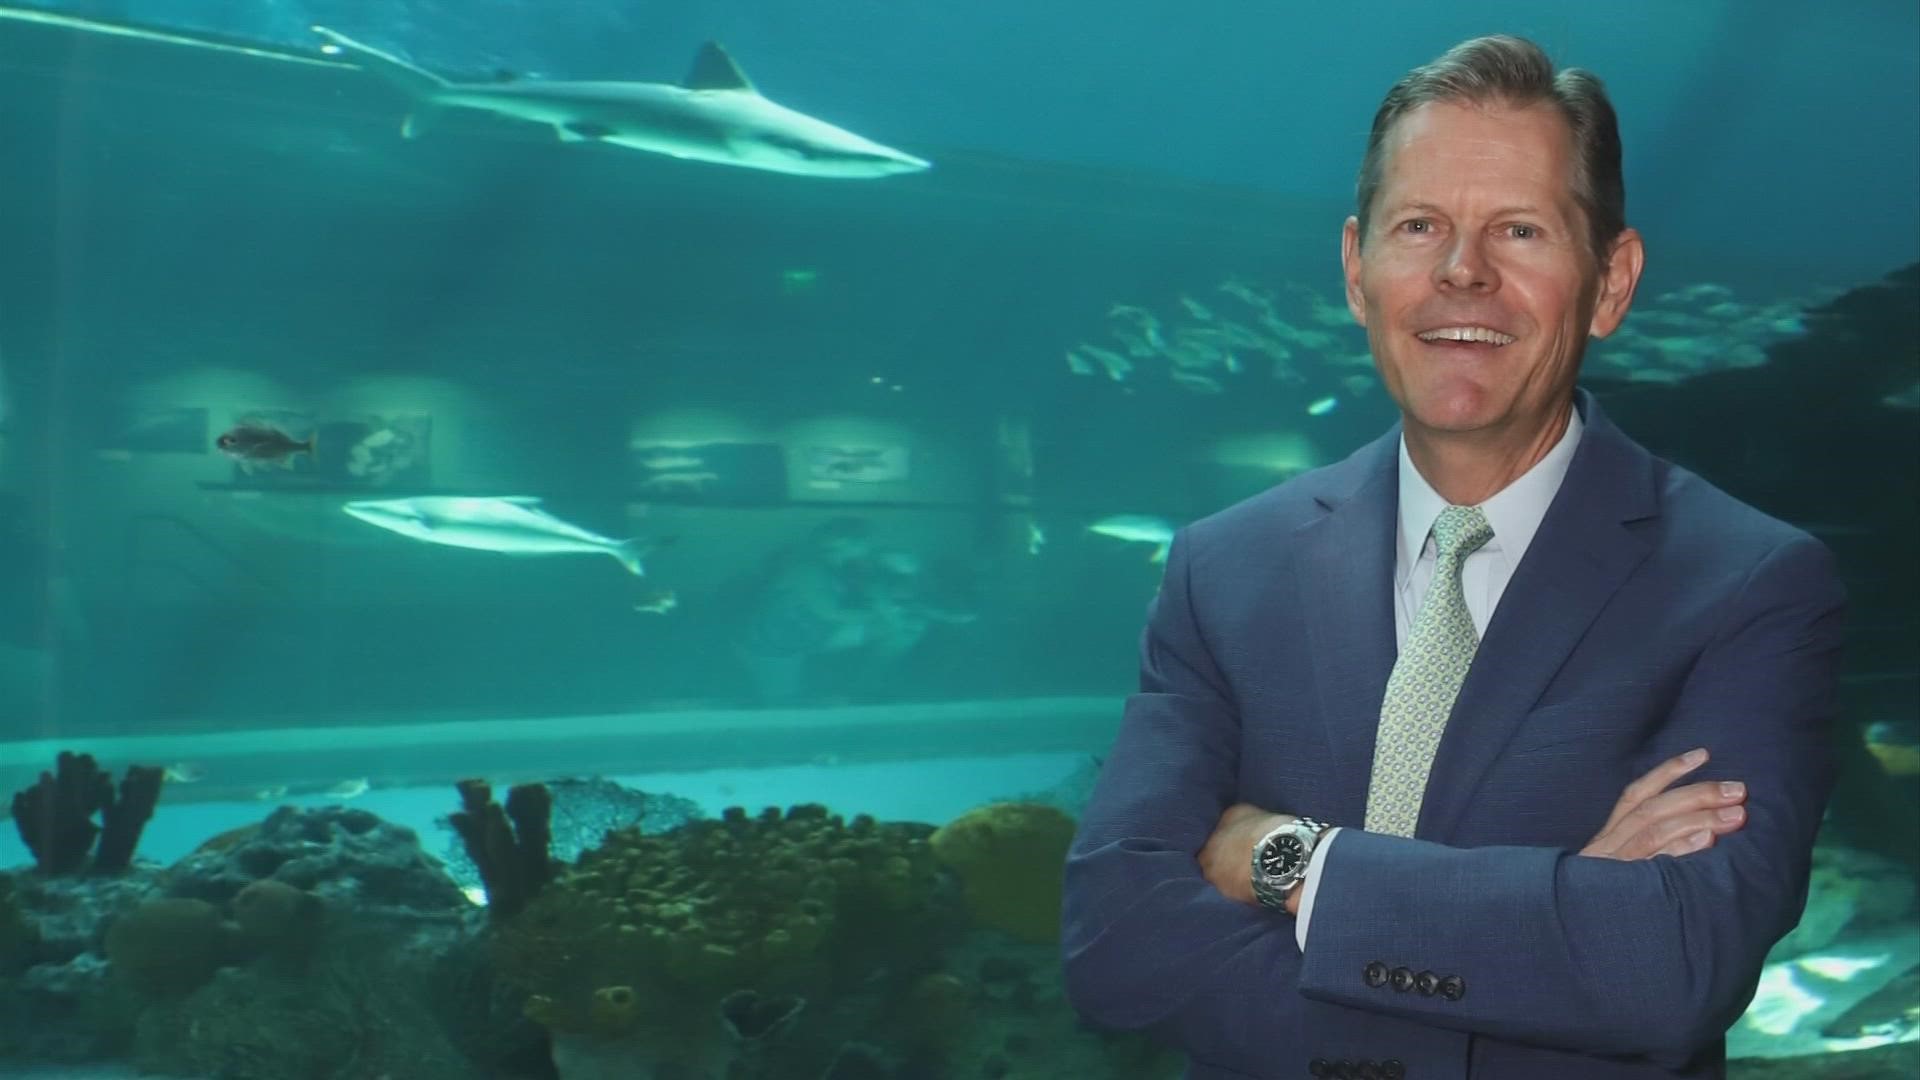 Tom Schmid comes from the Texas State Aquarium. He officially begins his first day as CEO of the Columbus Zoo on Monday.